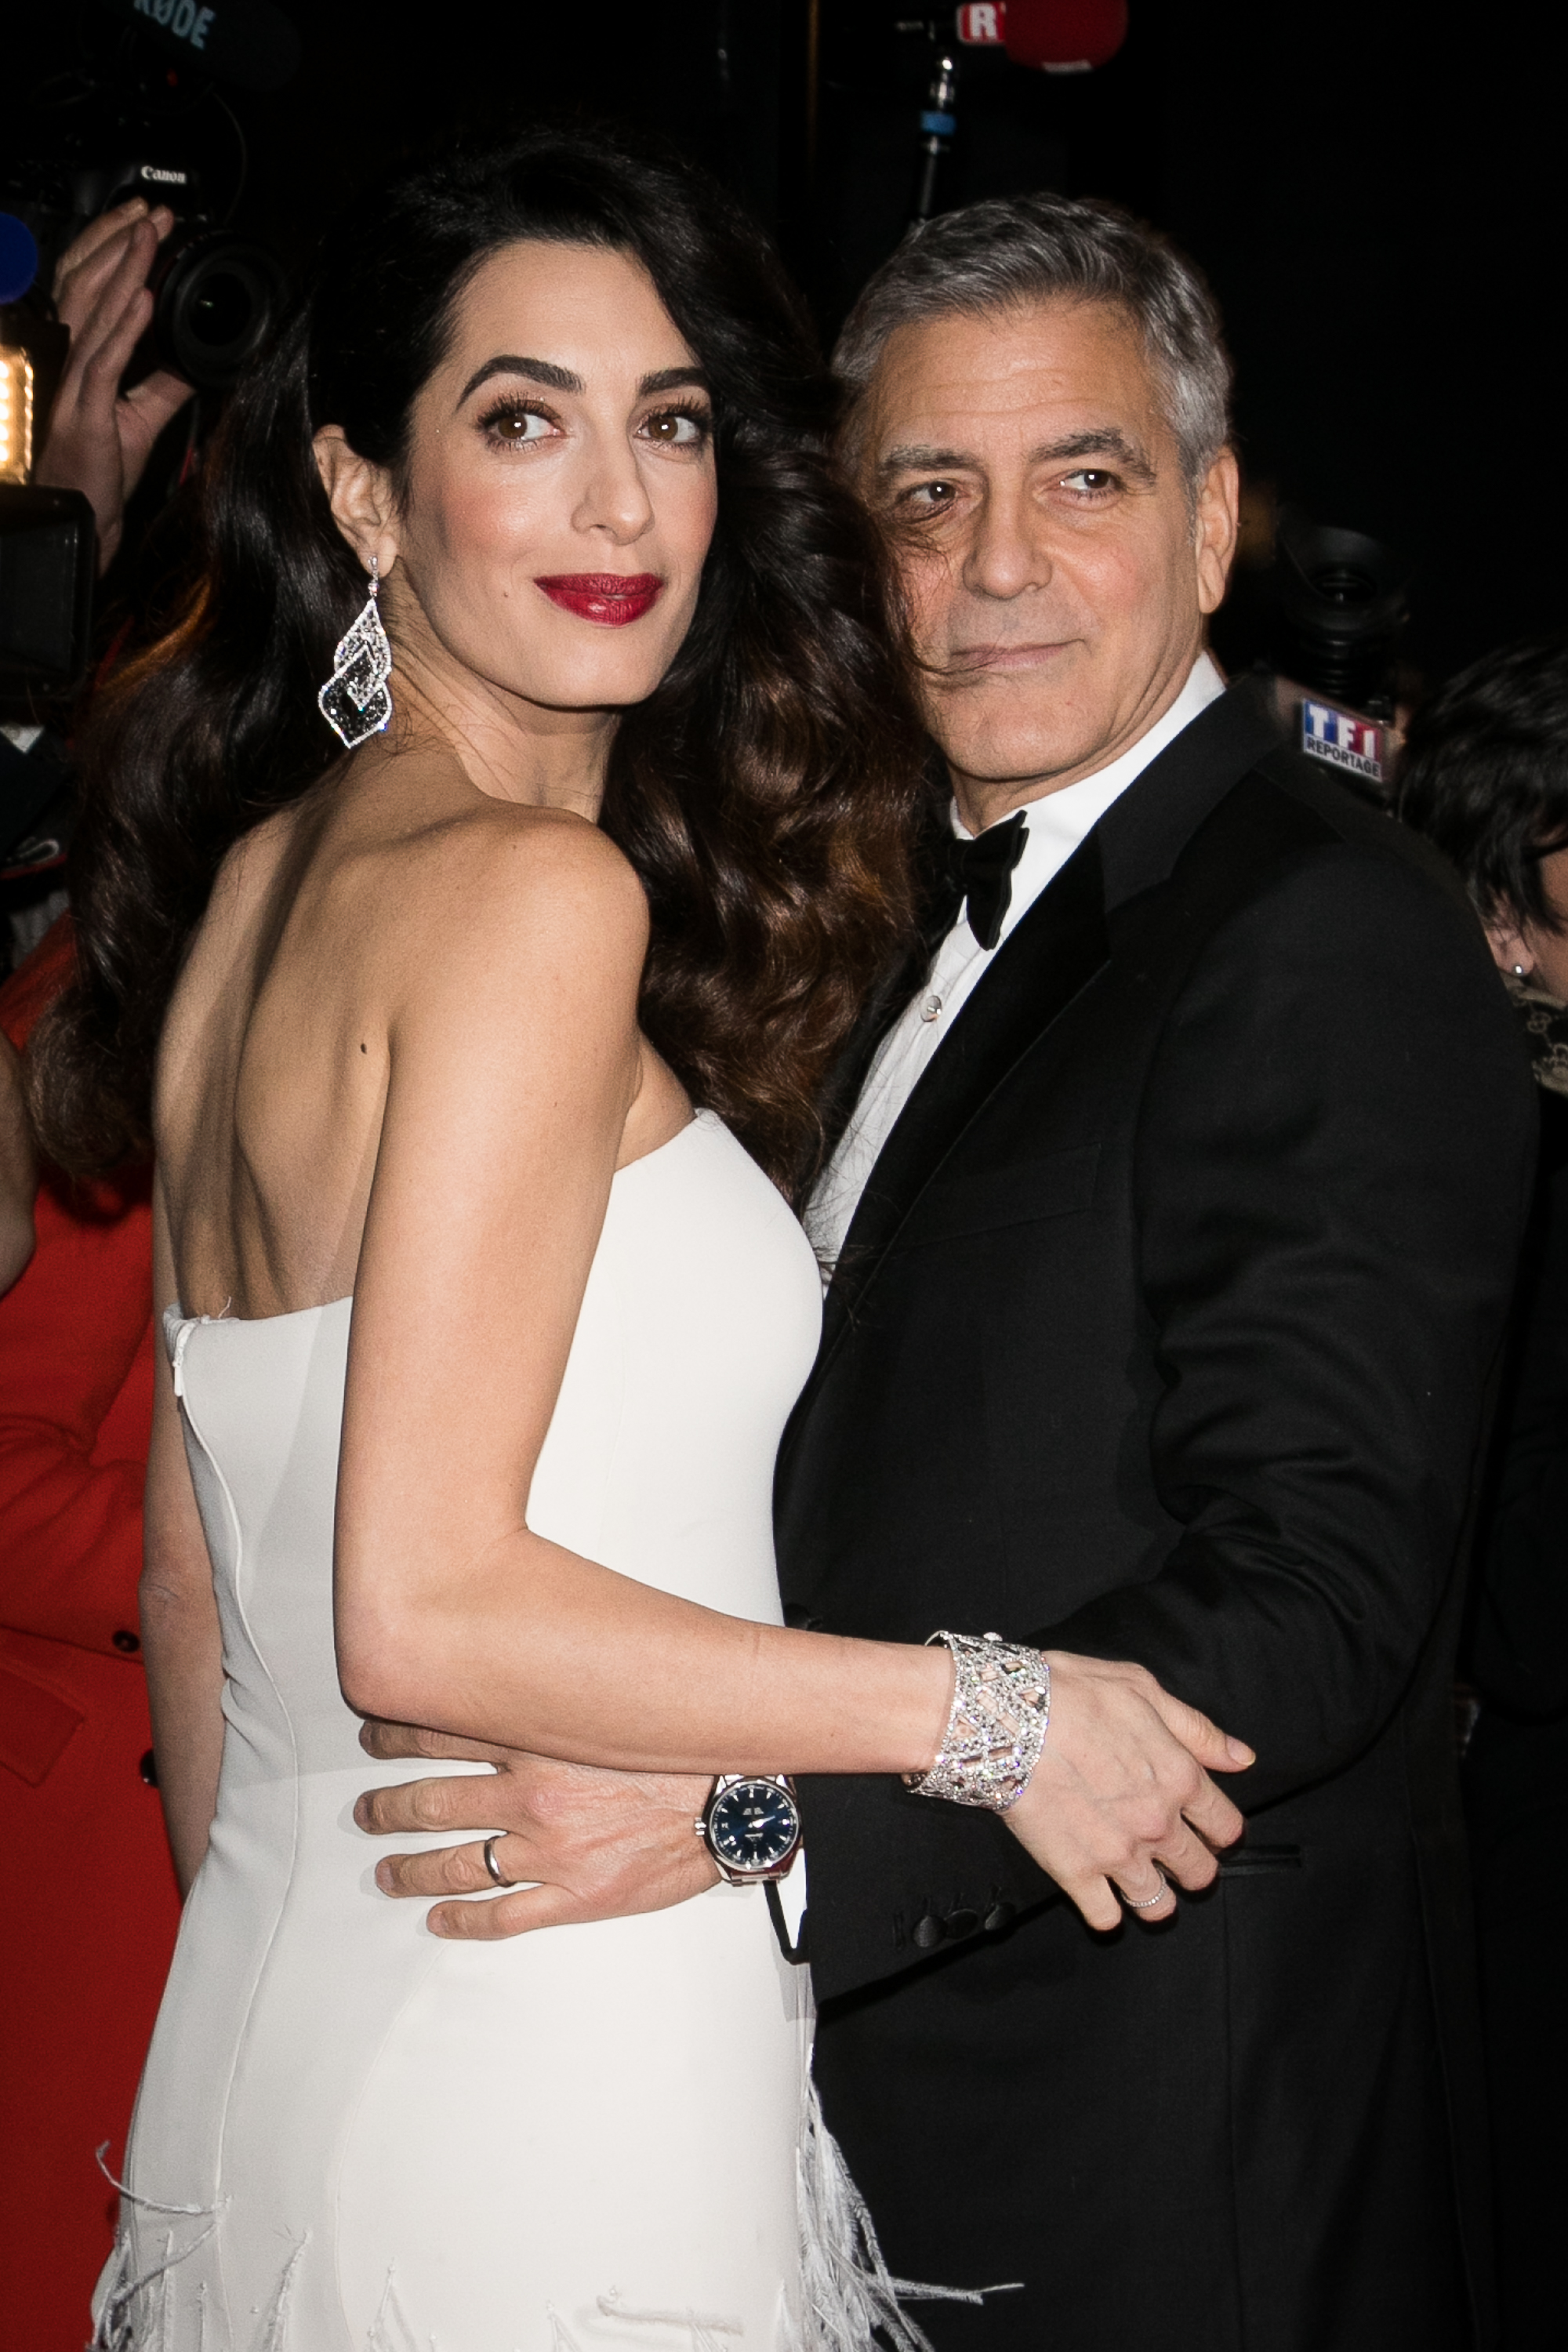 Amal Clooney and George Clooney in Paris, France on February 24, 2017 | Source: Getty Images